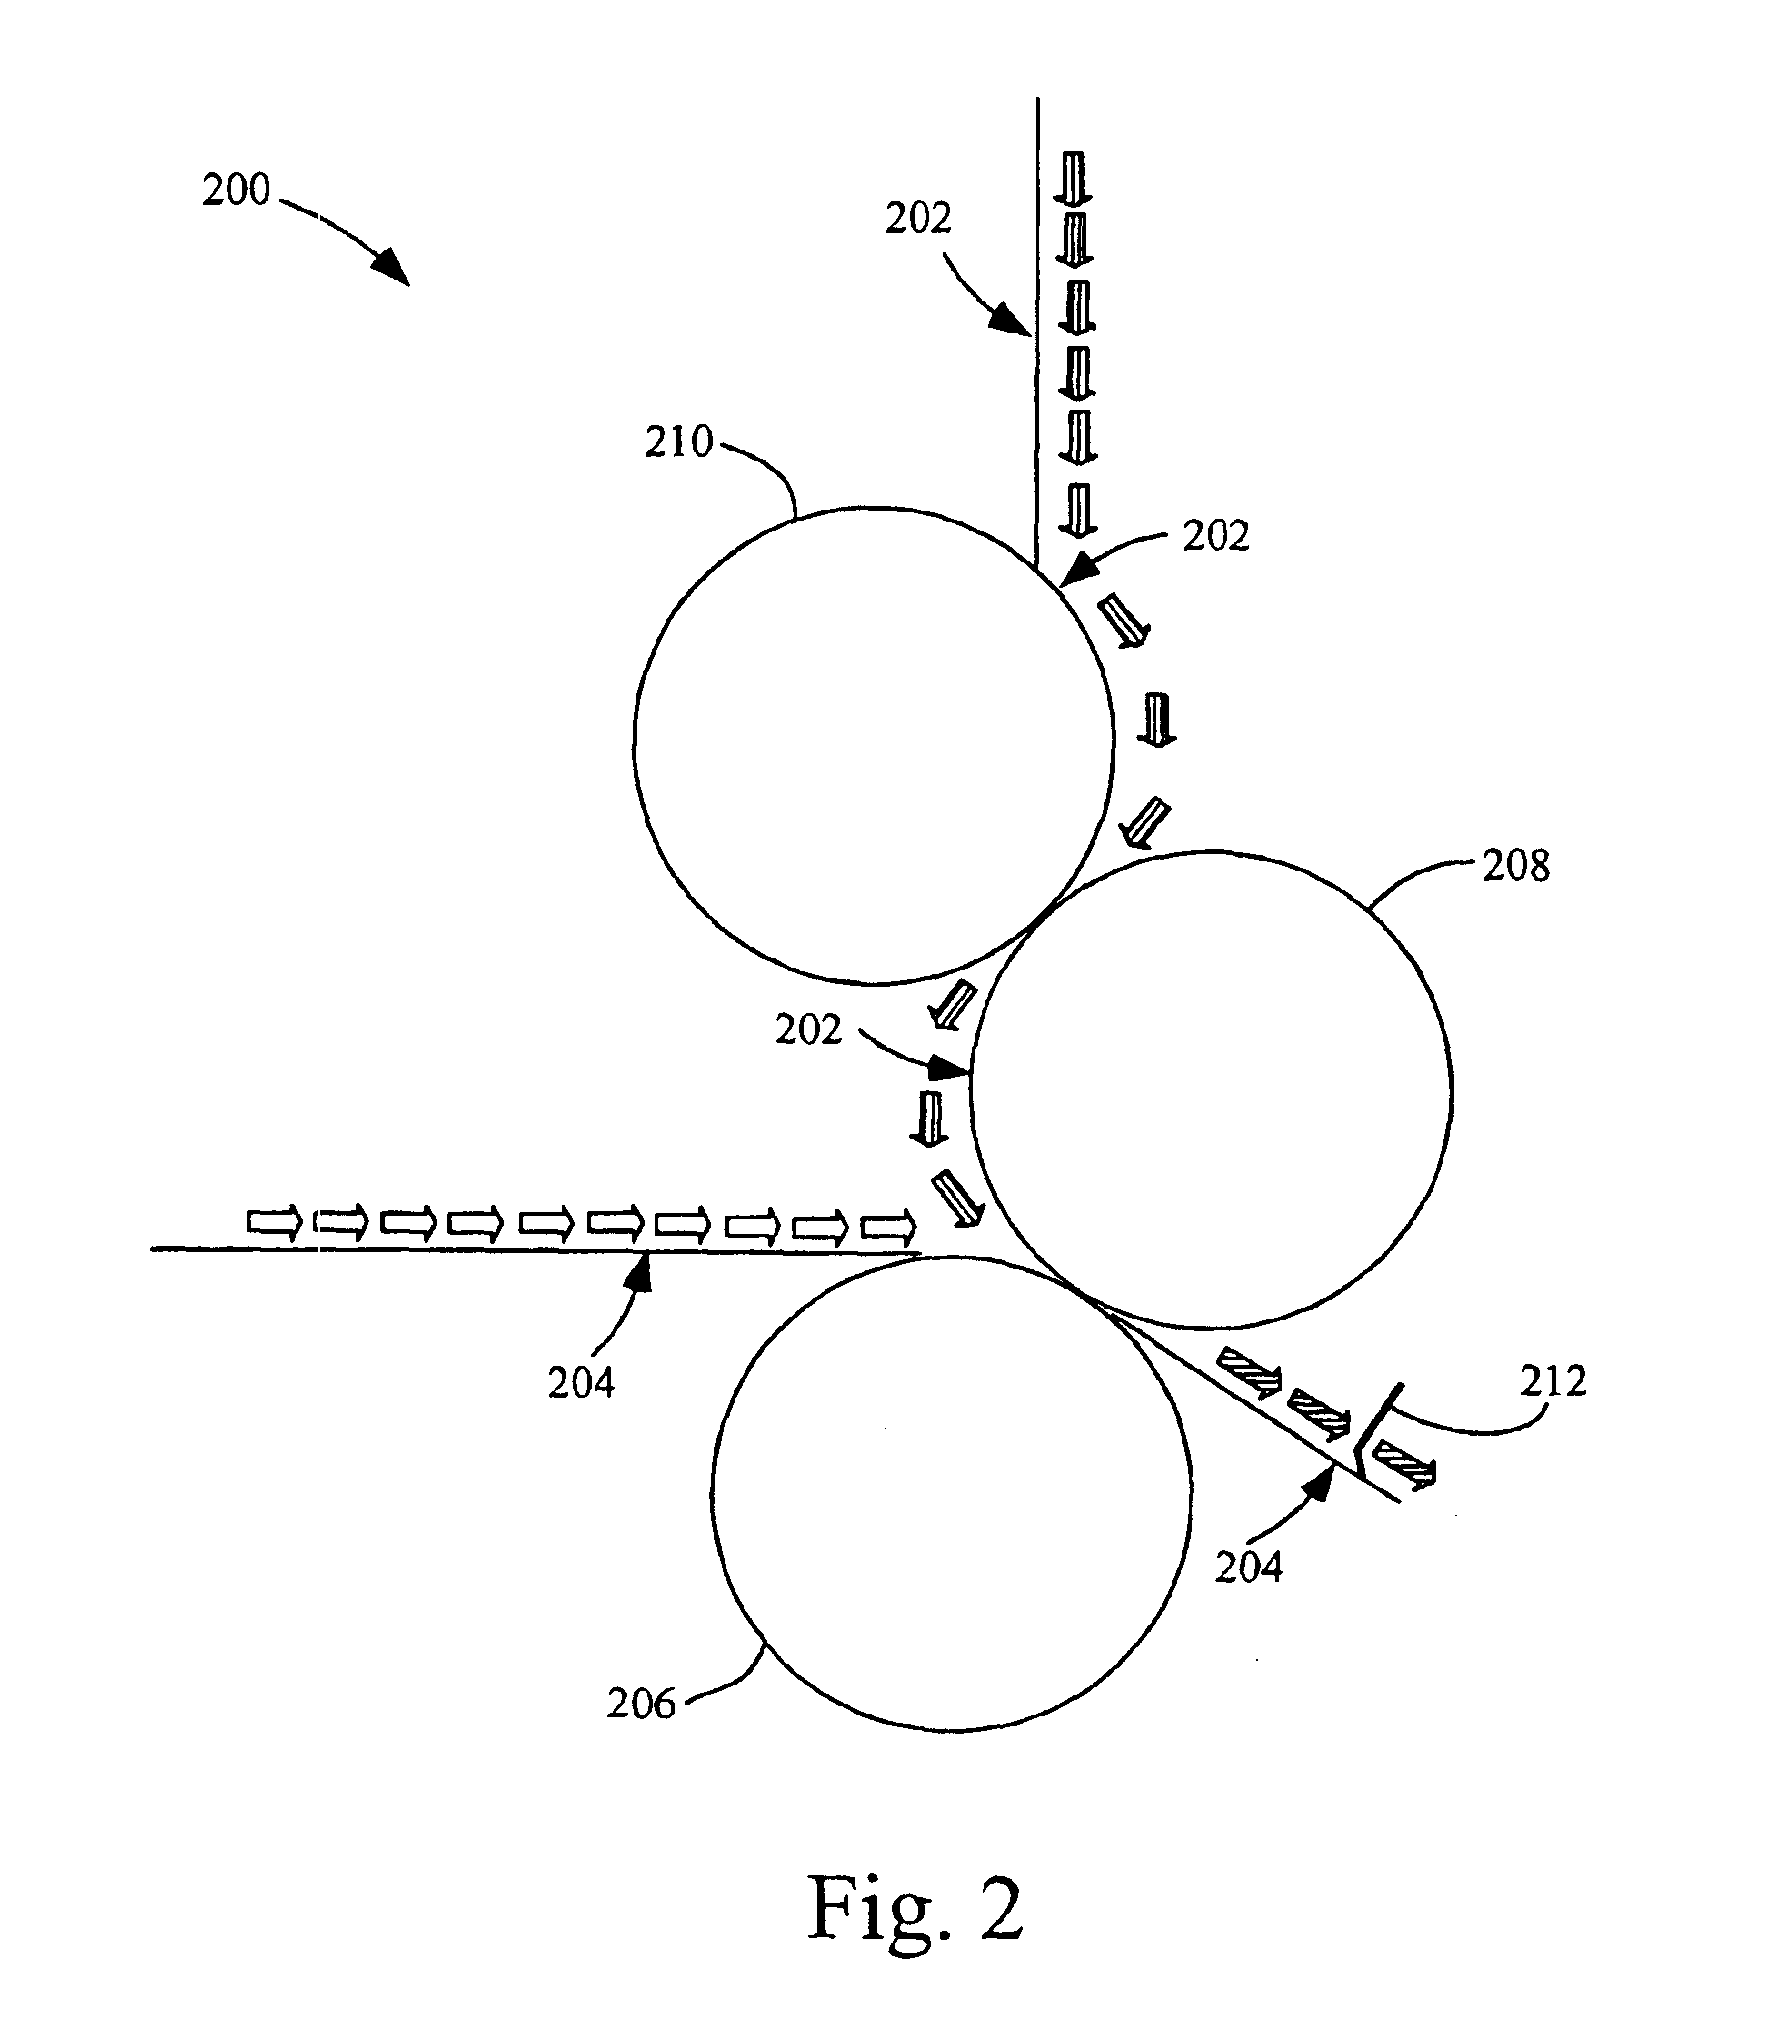 Electrochemical double layer capacitor having carbon powder electrodes